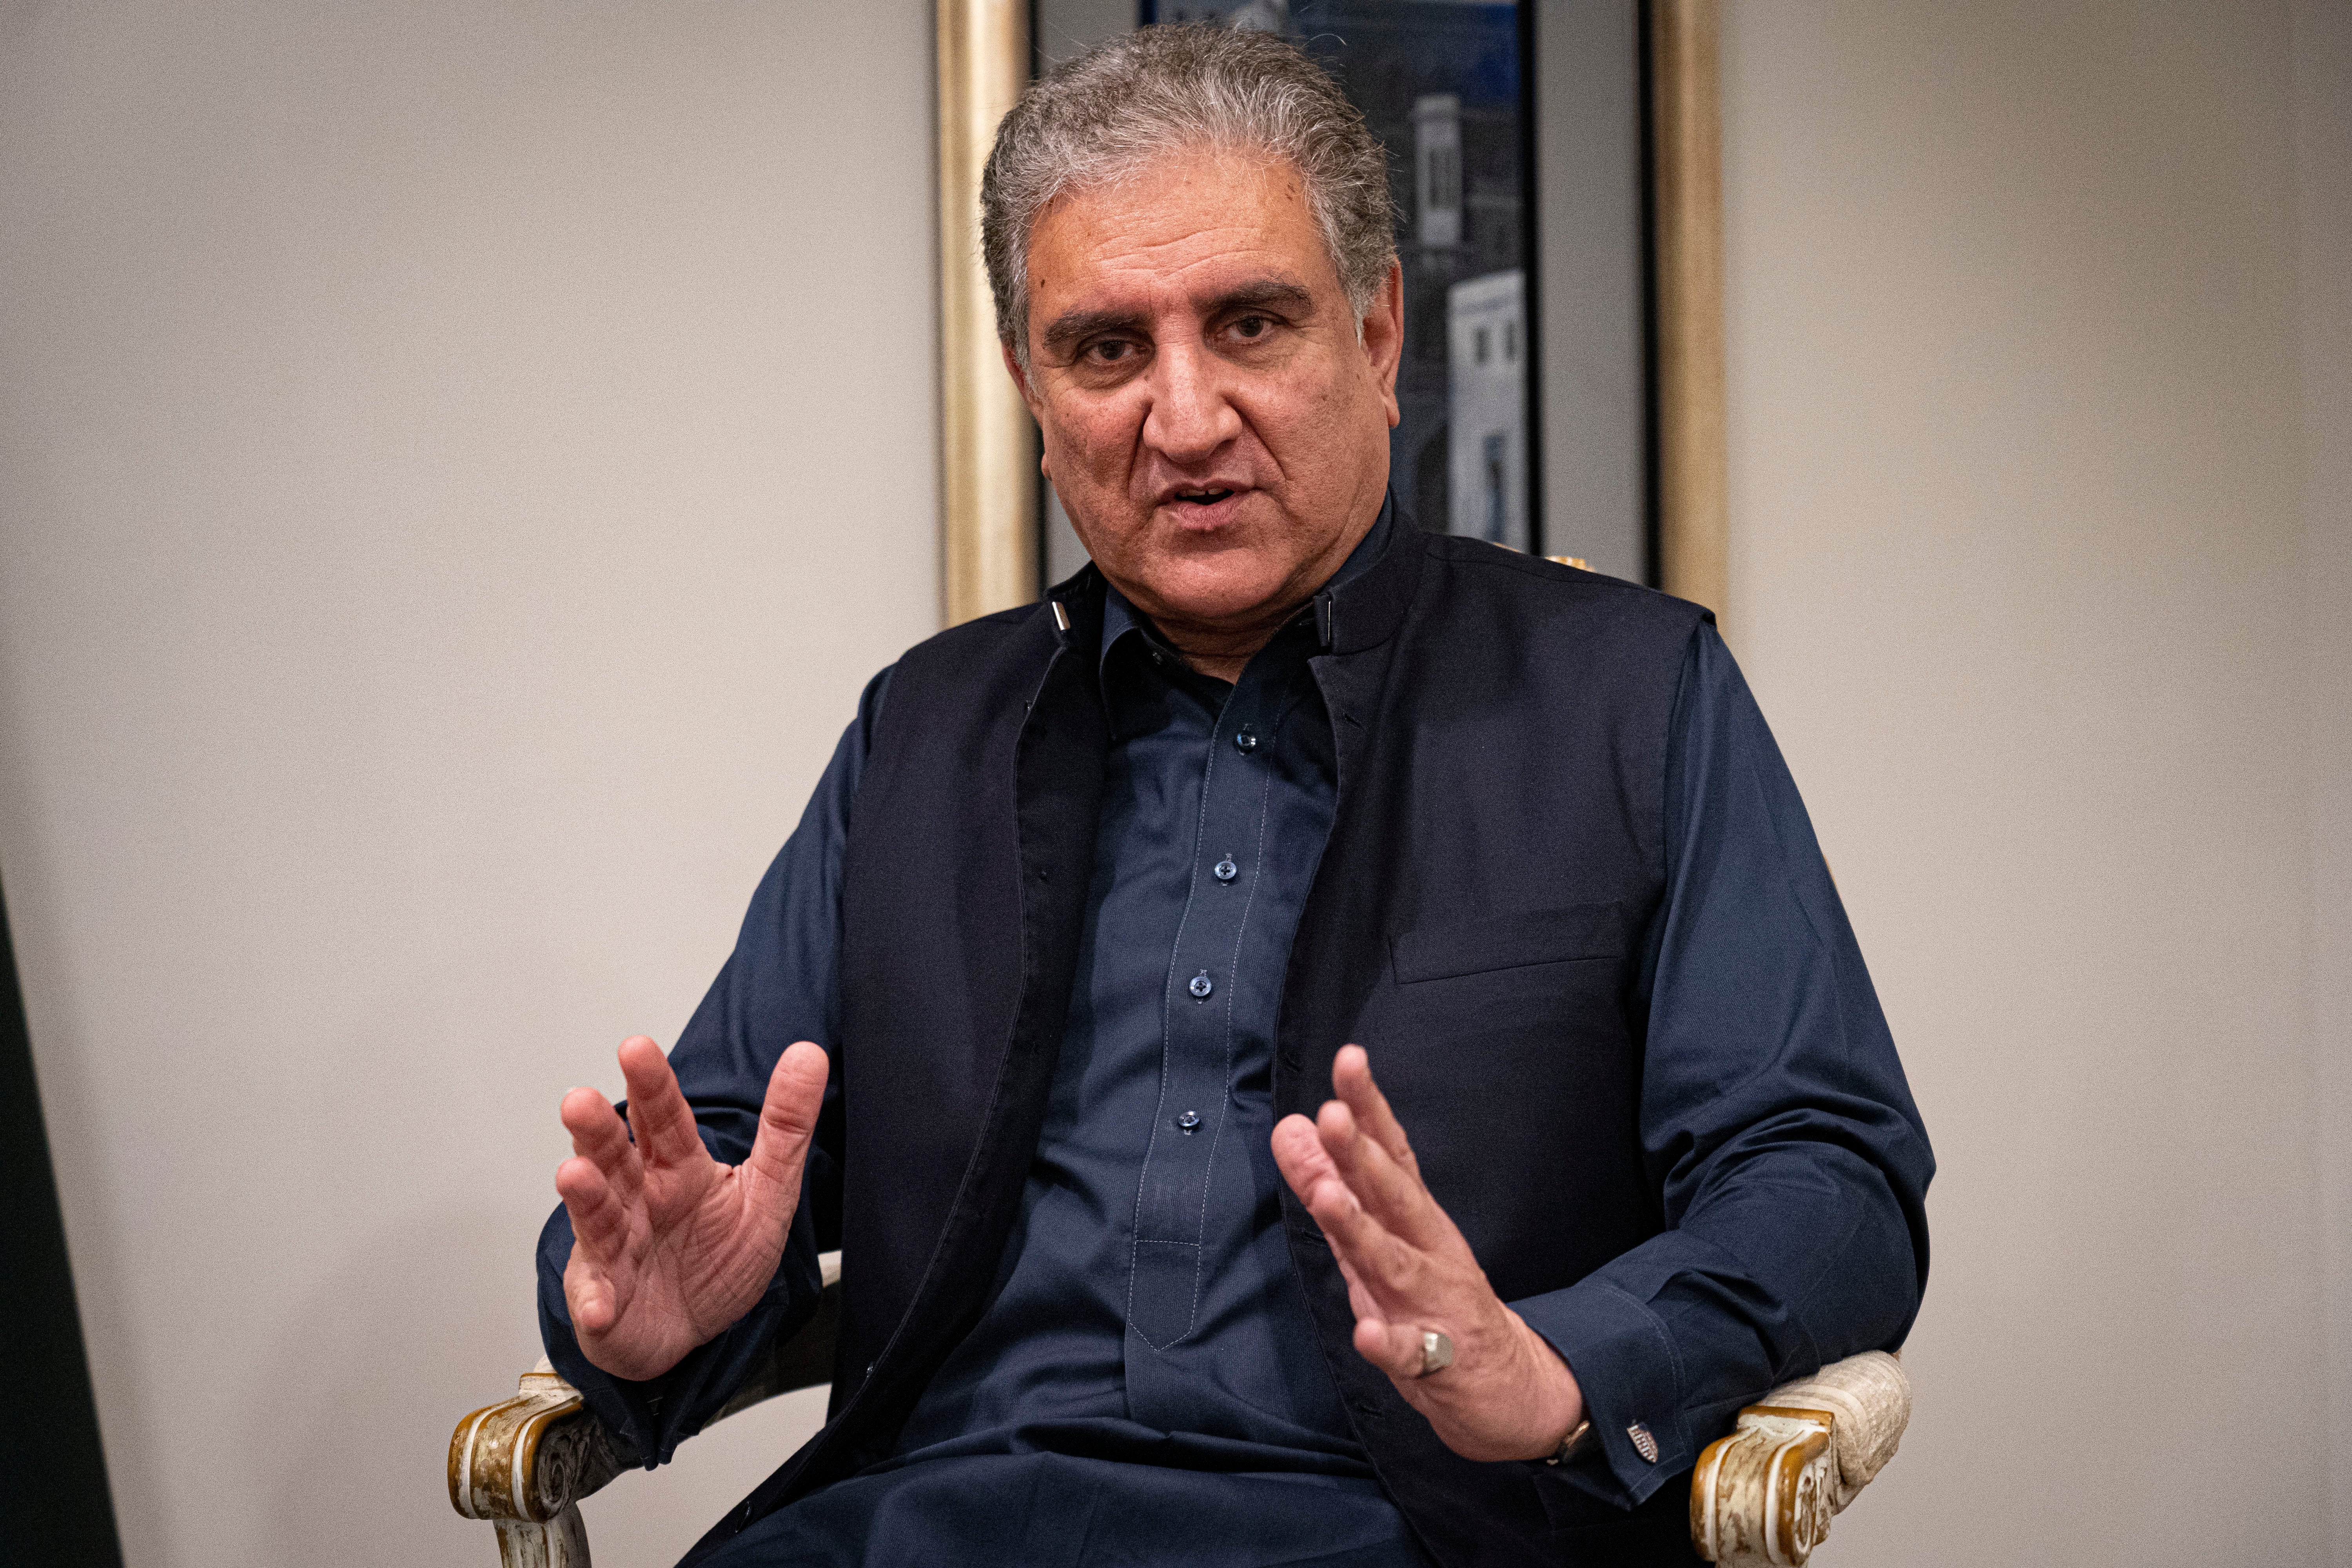 Pakistan’s foreign minister, Shah Mahmood Qureshi